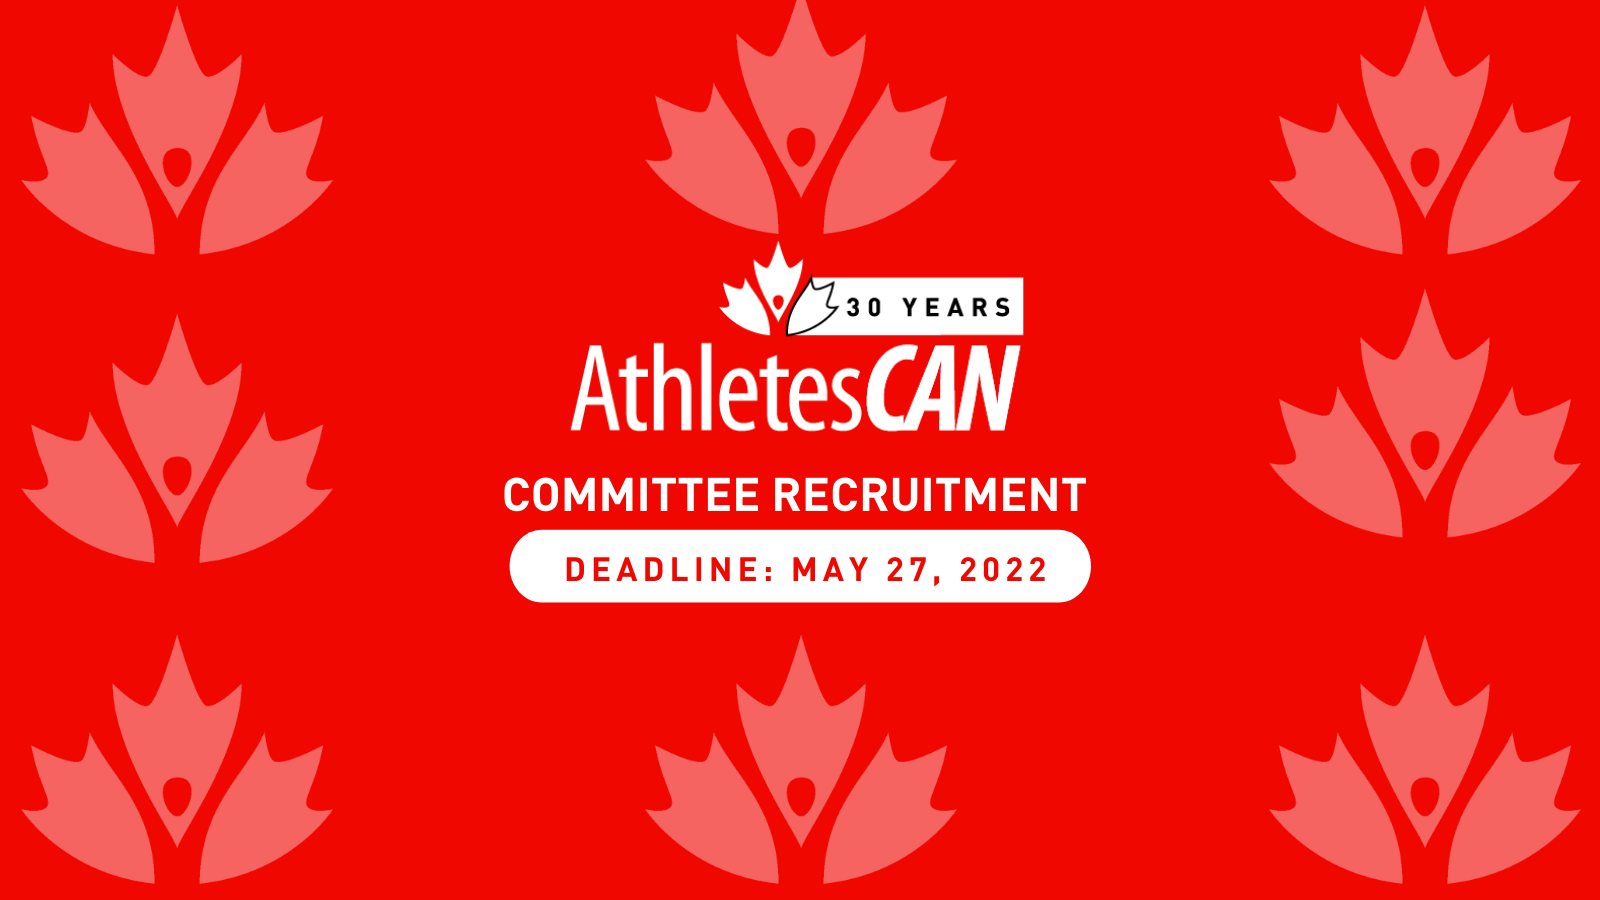 Call for Expression of Interest: AthletesCAN seeks new committee members